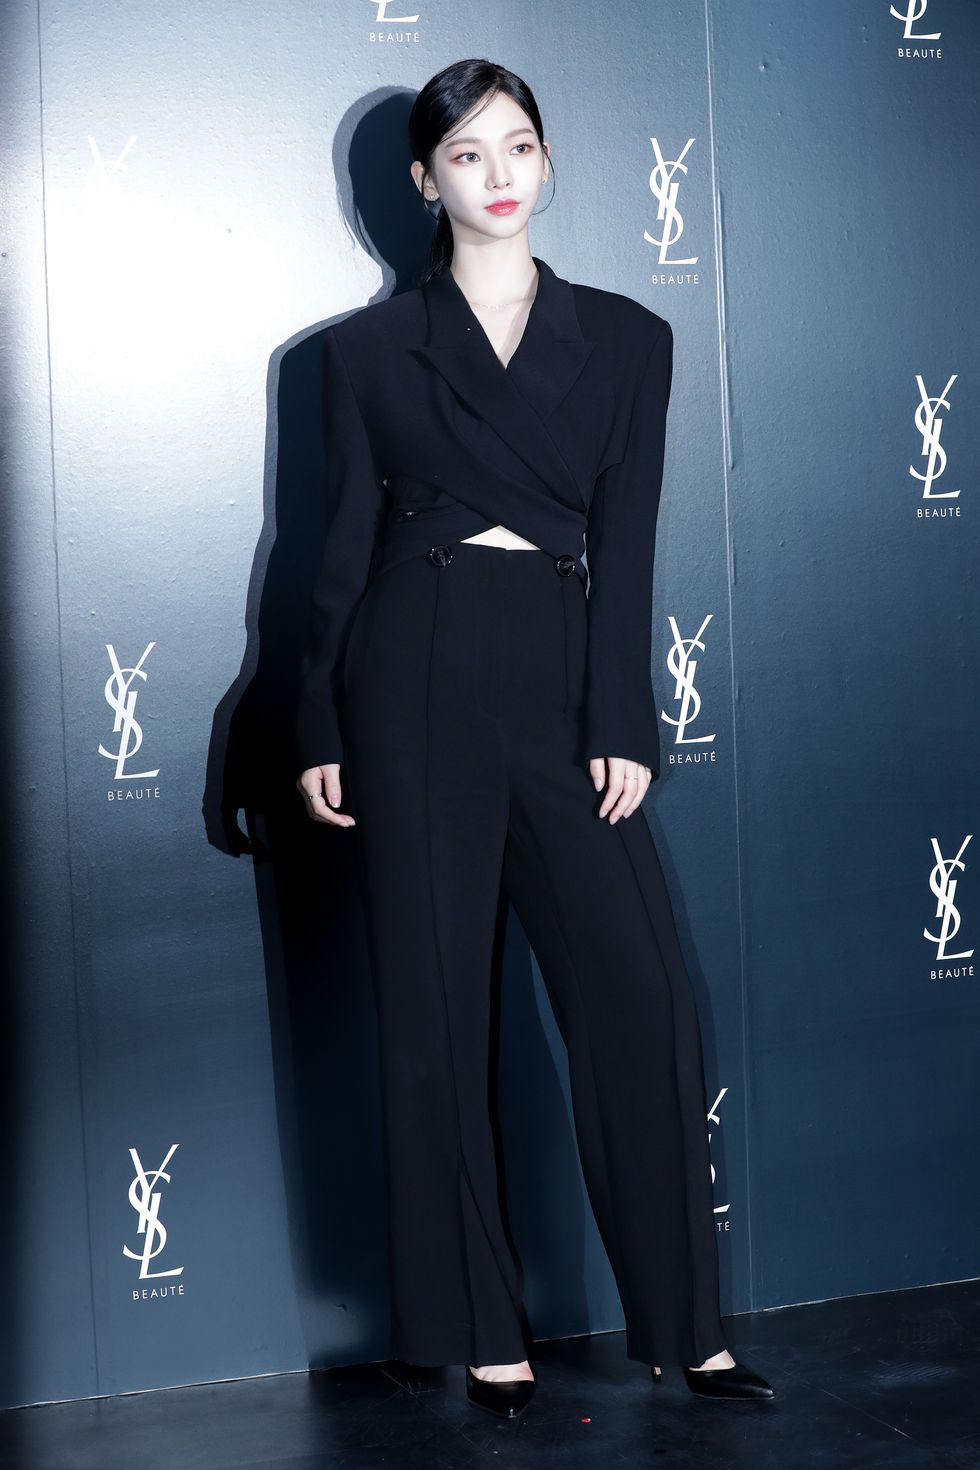 'ysl beauty zone' pop up store open photocall